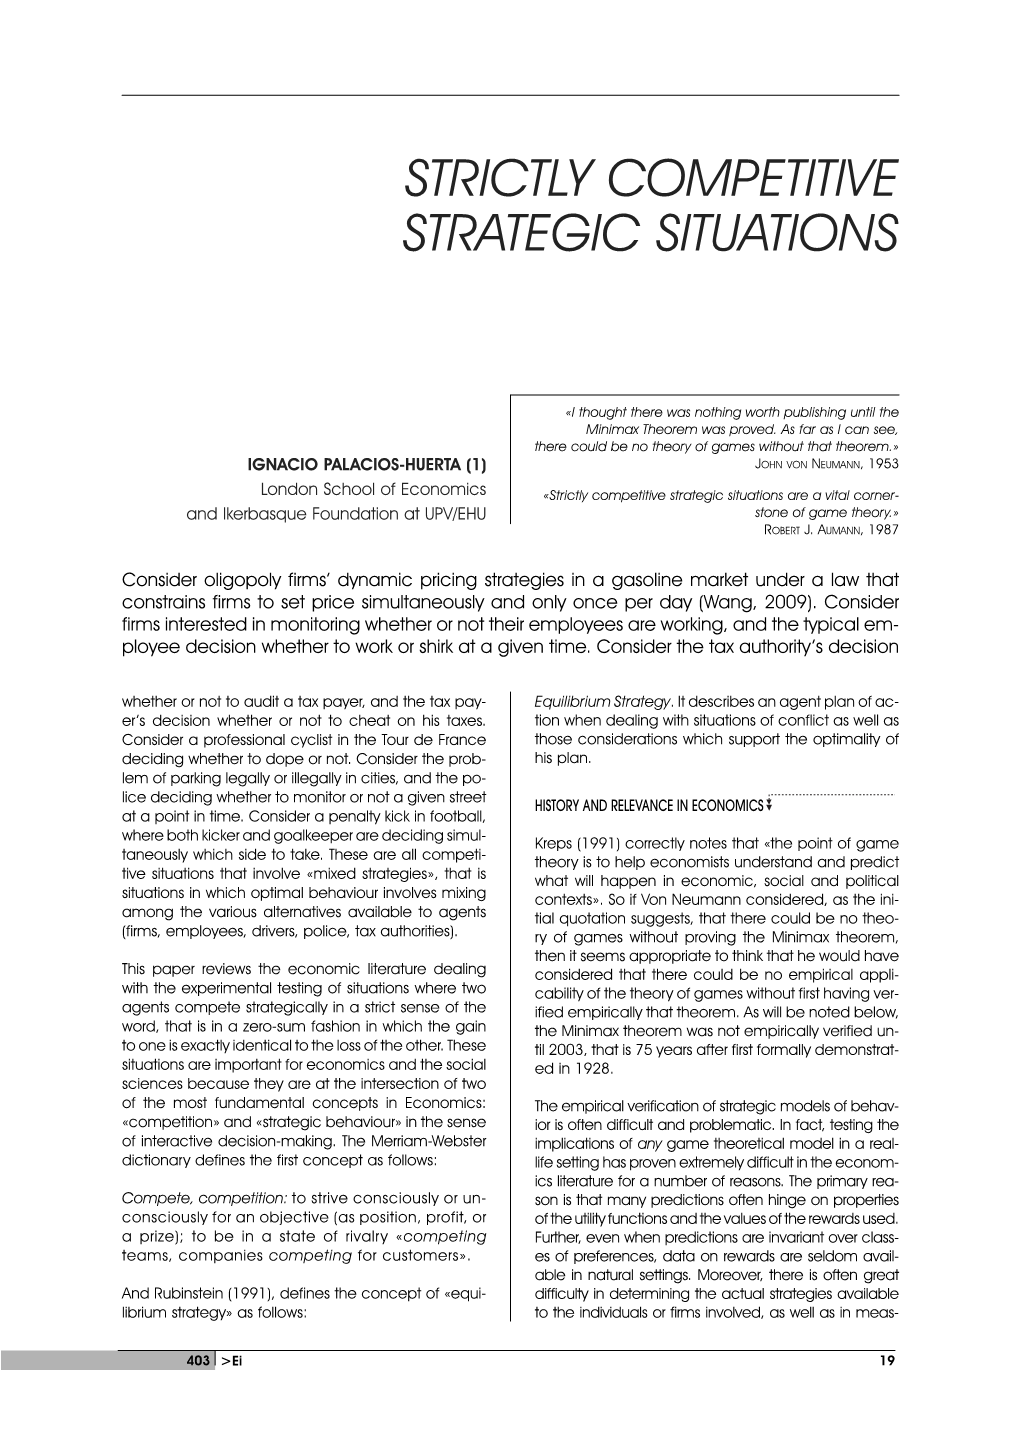 Strictly Competitive Strategic Situations